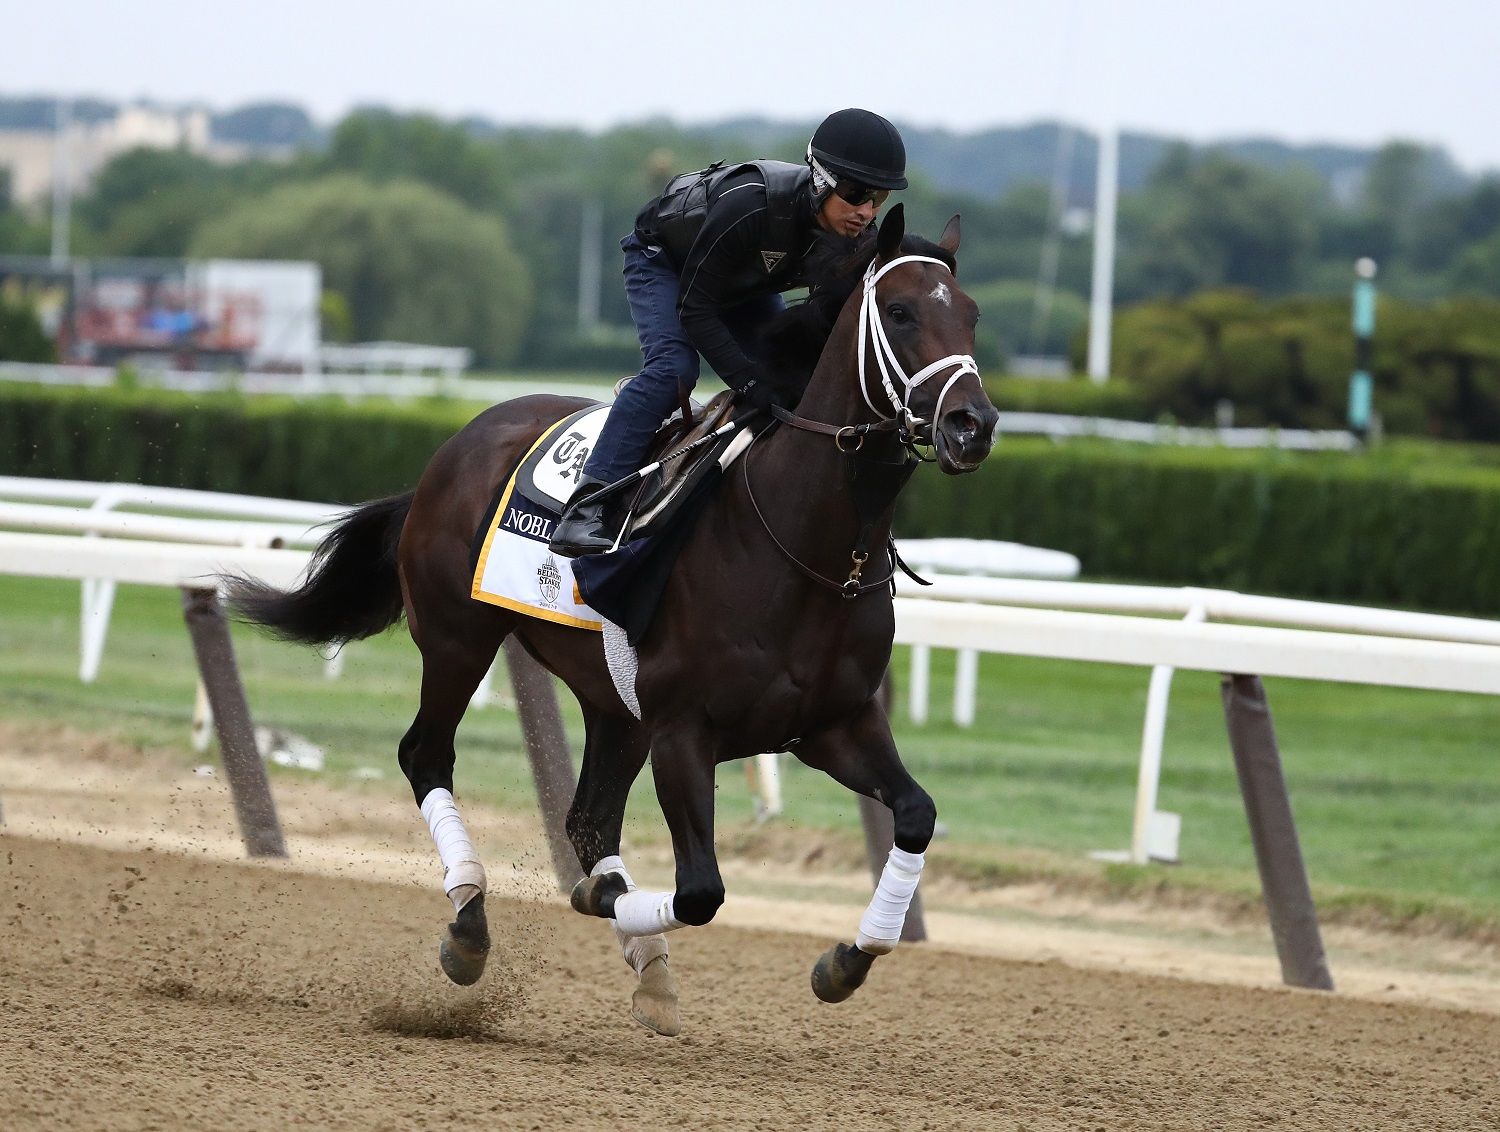 ELMONT, NY - JUNE 07:  Belmont Stakes contender Noble Indy trains prior to the 150th running of the Belmont Stakes at Belmont Park on June 7, 2018 in Elmont, New York.  (Photo by Al Bello/Getty Images)